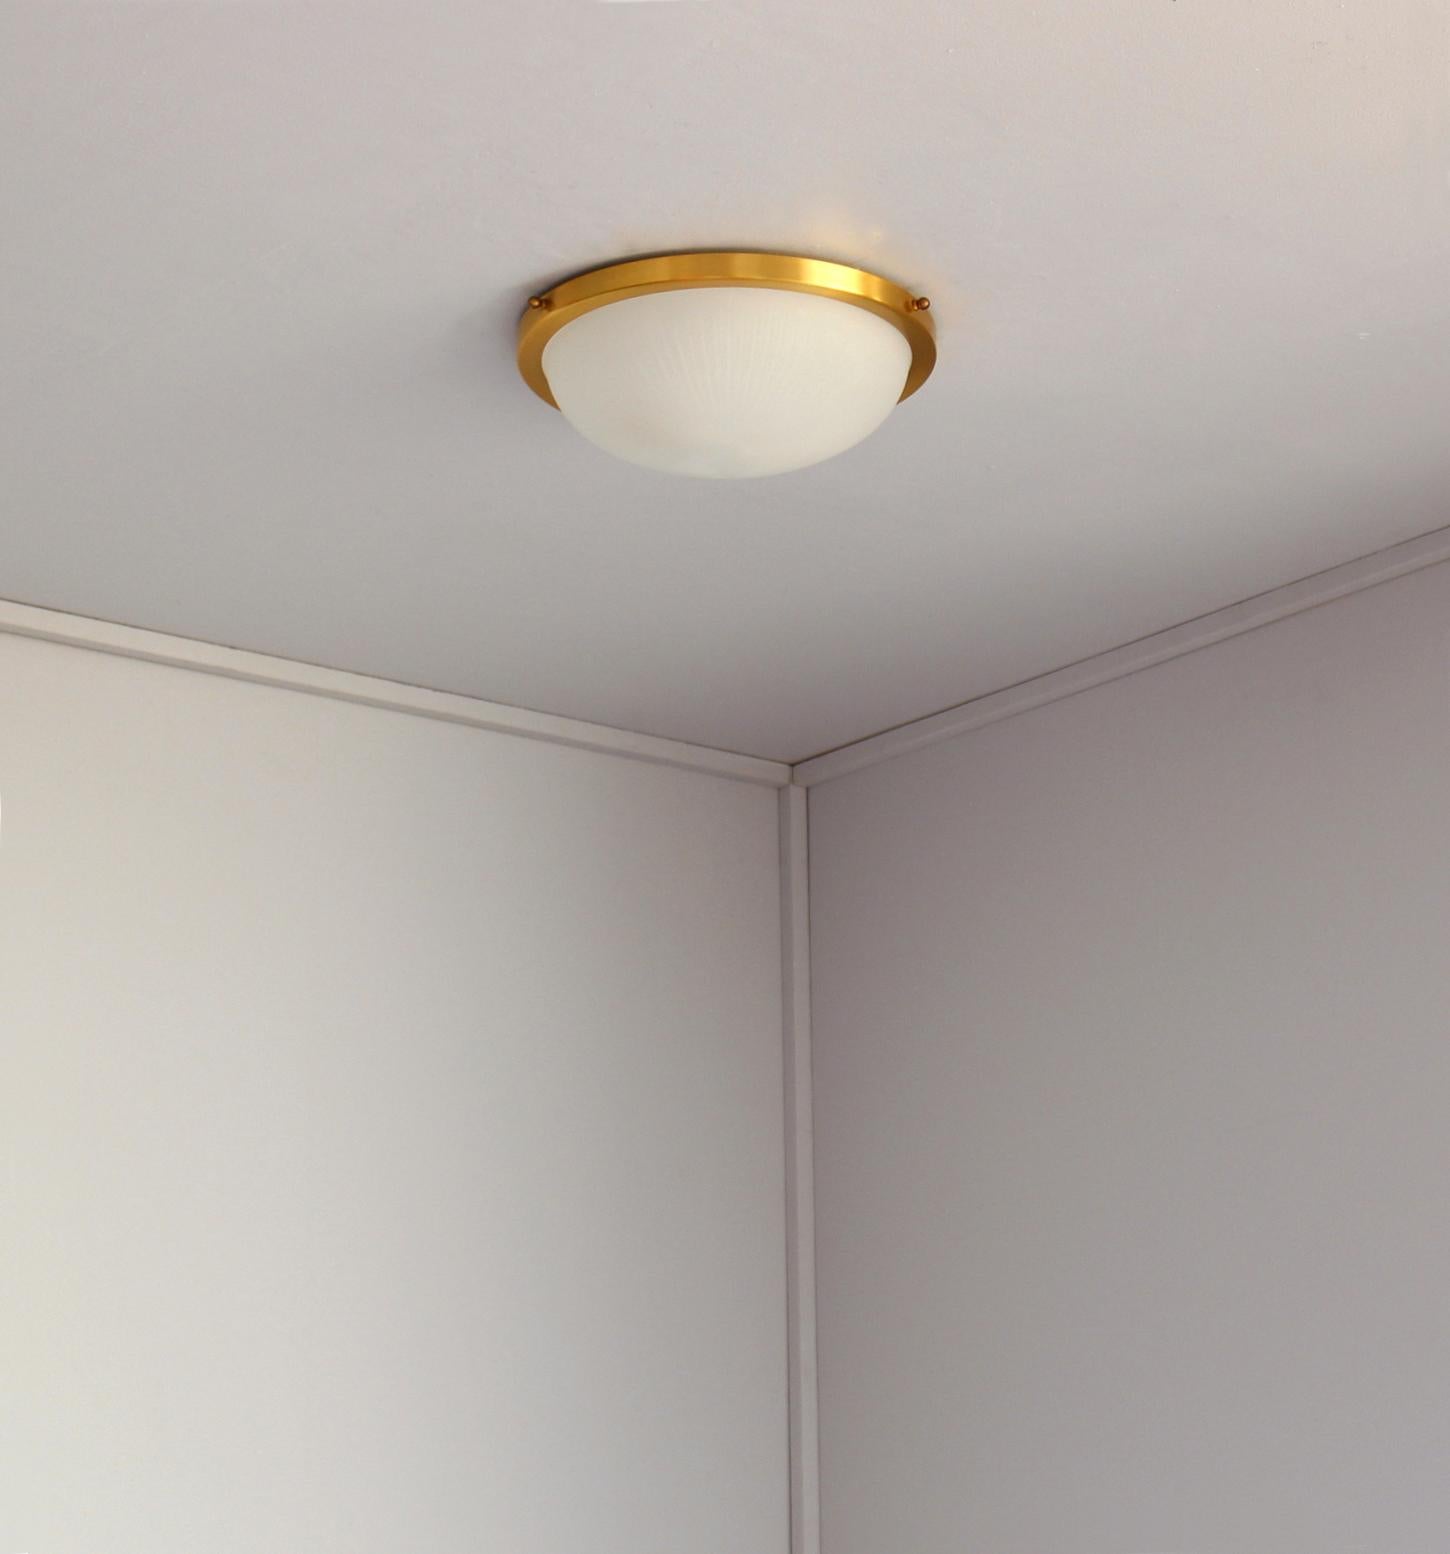 Jean Perzel - A fine French midcentury ceiling light with a satin brushed circular brass structure that holds a fluted frosted glass bowl diffuser.
Signed.